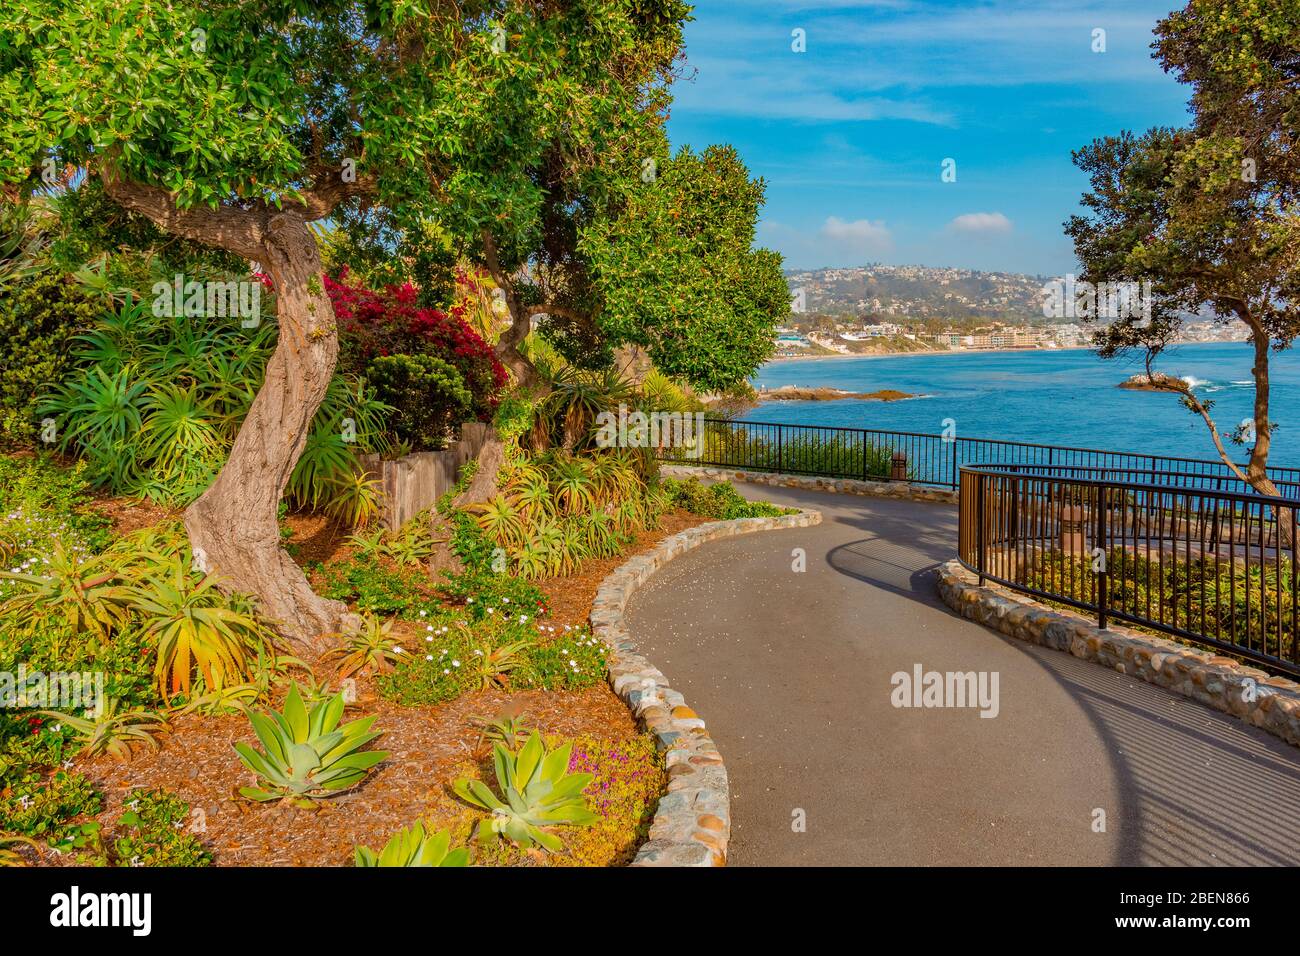 Laguna Beach is a small coastal city in Orange County, California. It’s known for it's beautiful parks and beaches. Art galleries are abundant. Stock Photo